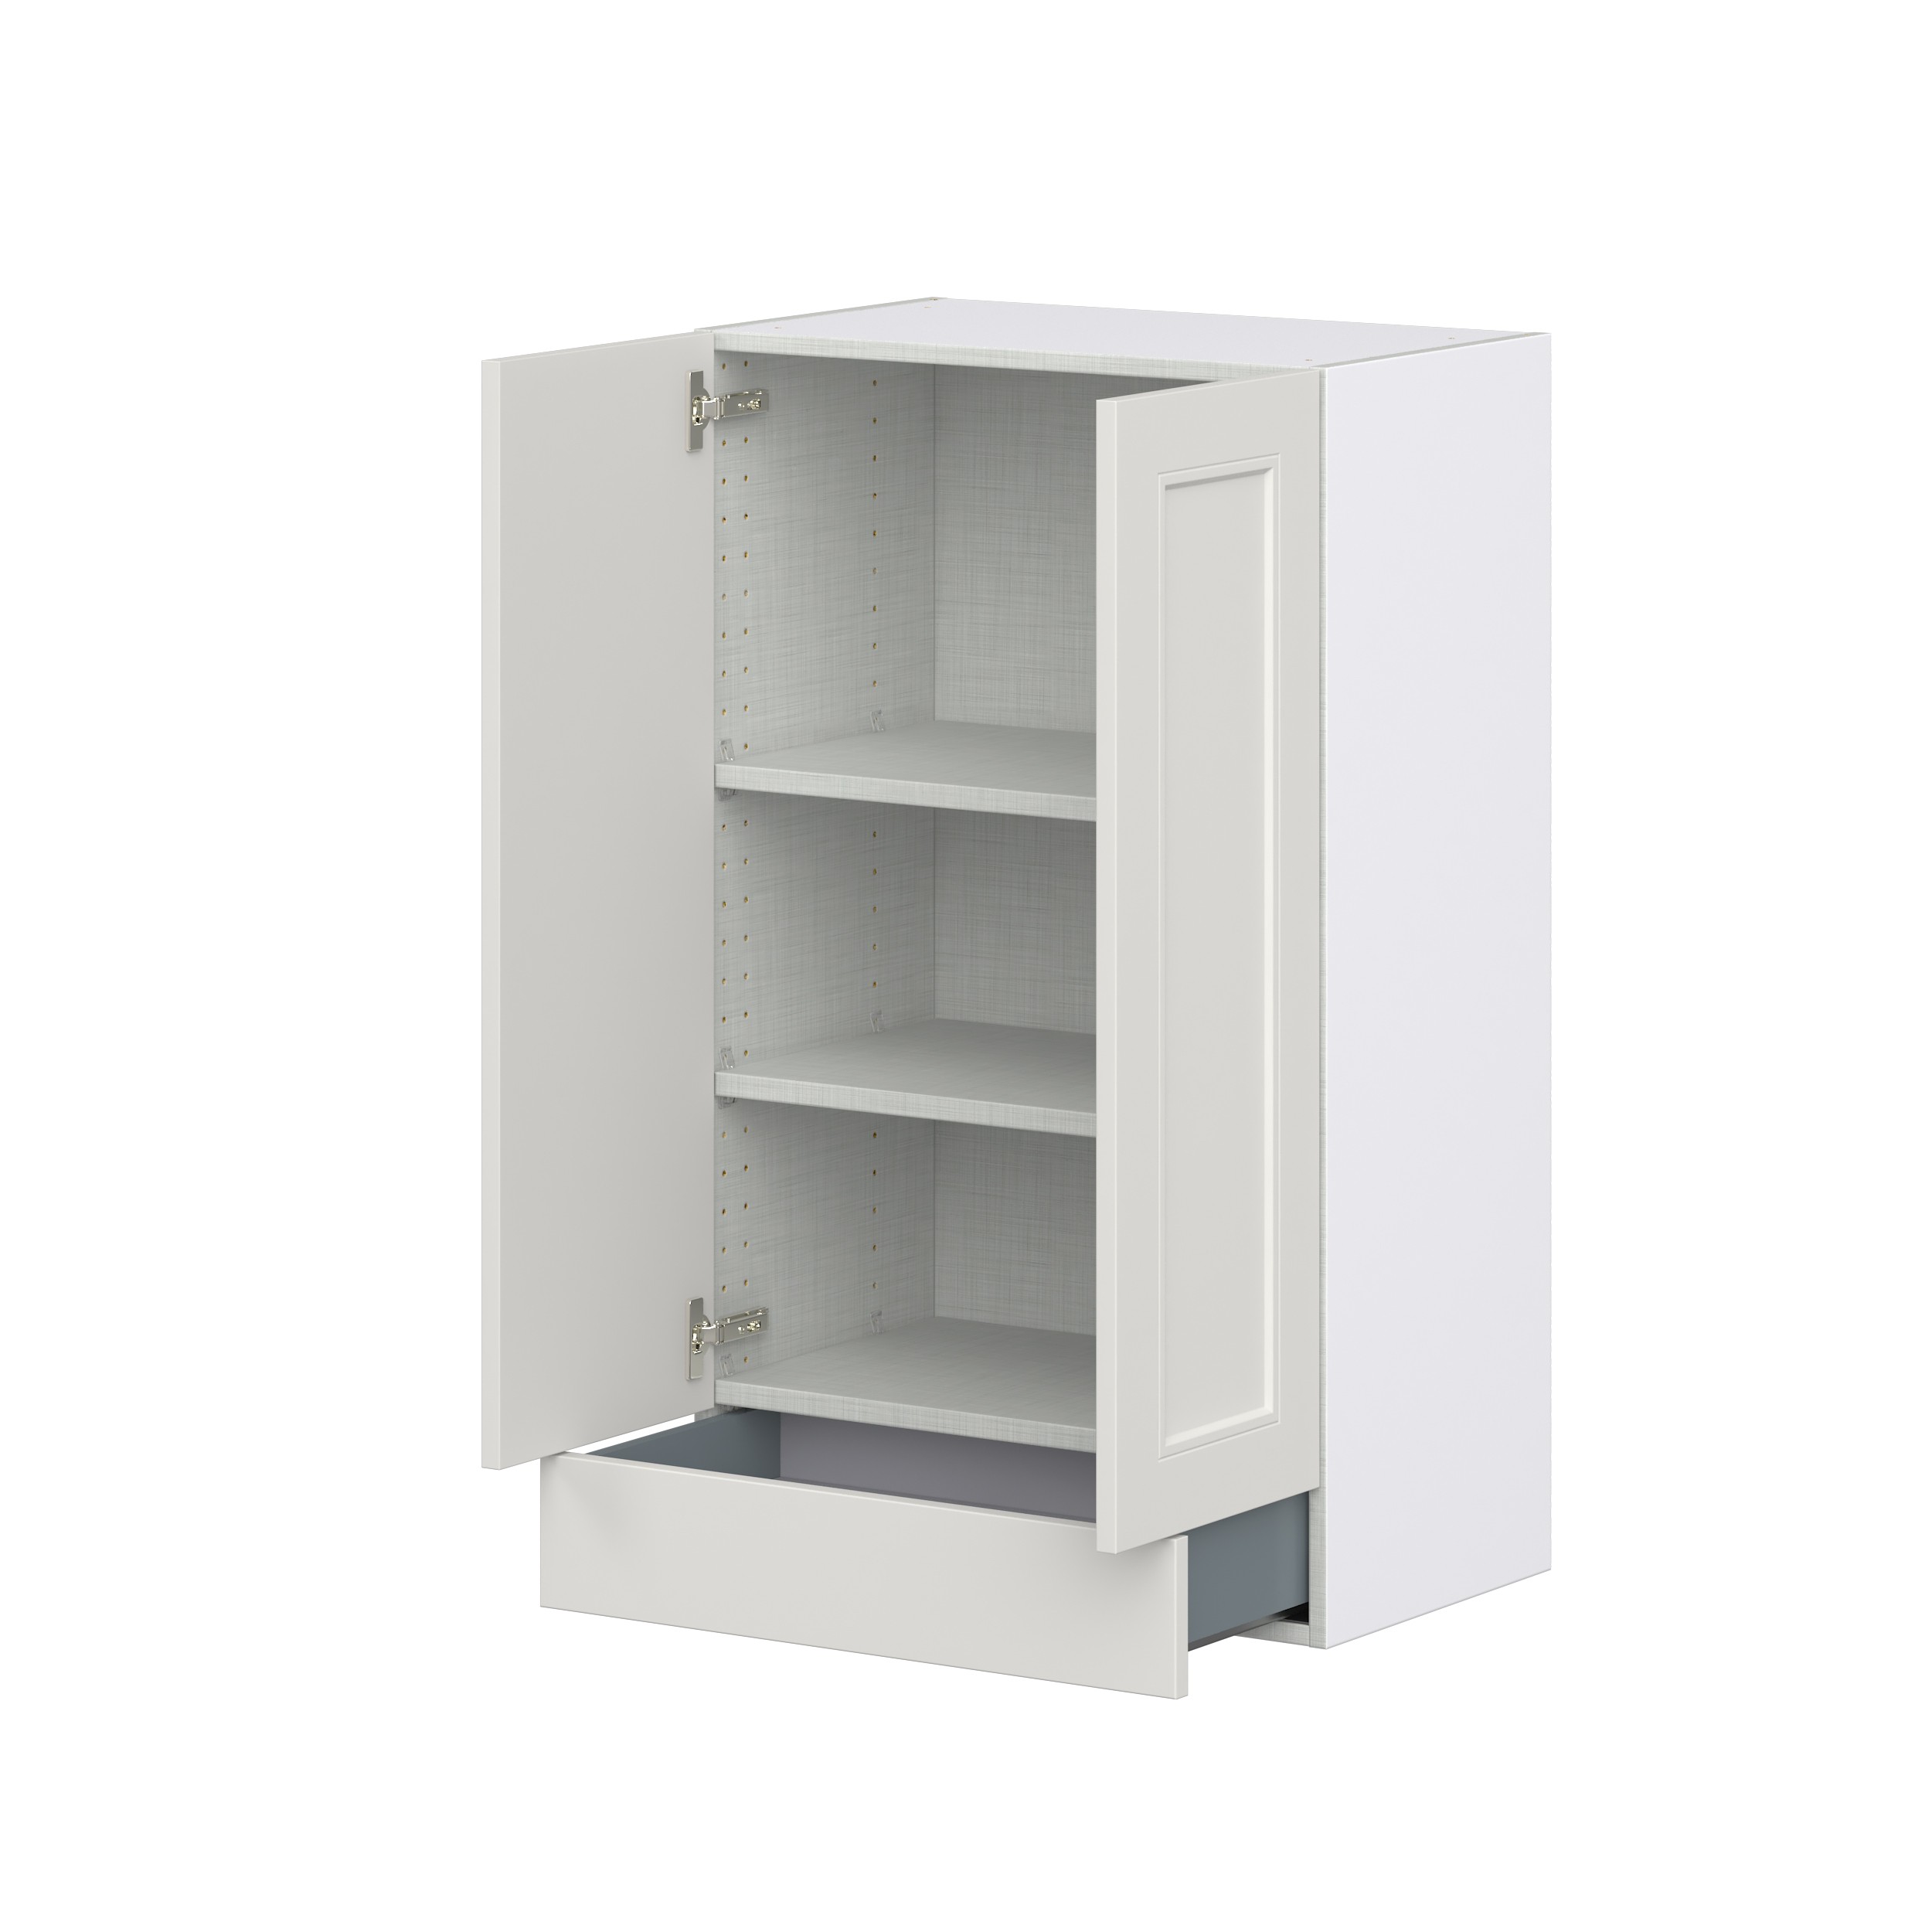 Wisteria Painted Light Gray Recessed Assembled Wall Cabinet with 2 Doors and a 5 in. Drawer (24 in. W x 40 in. H x 14 in. D)